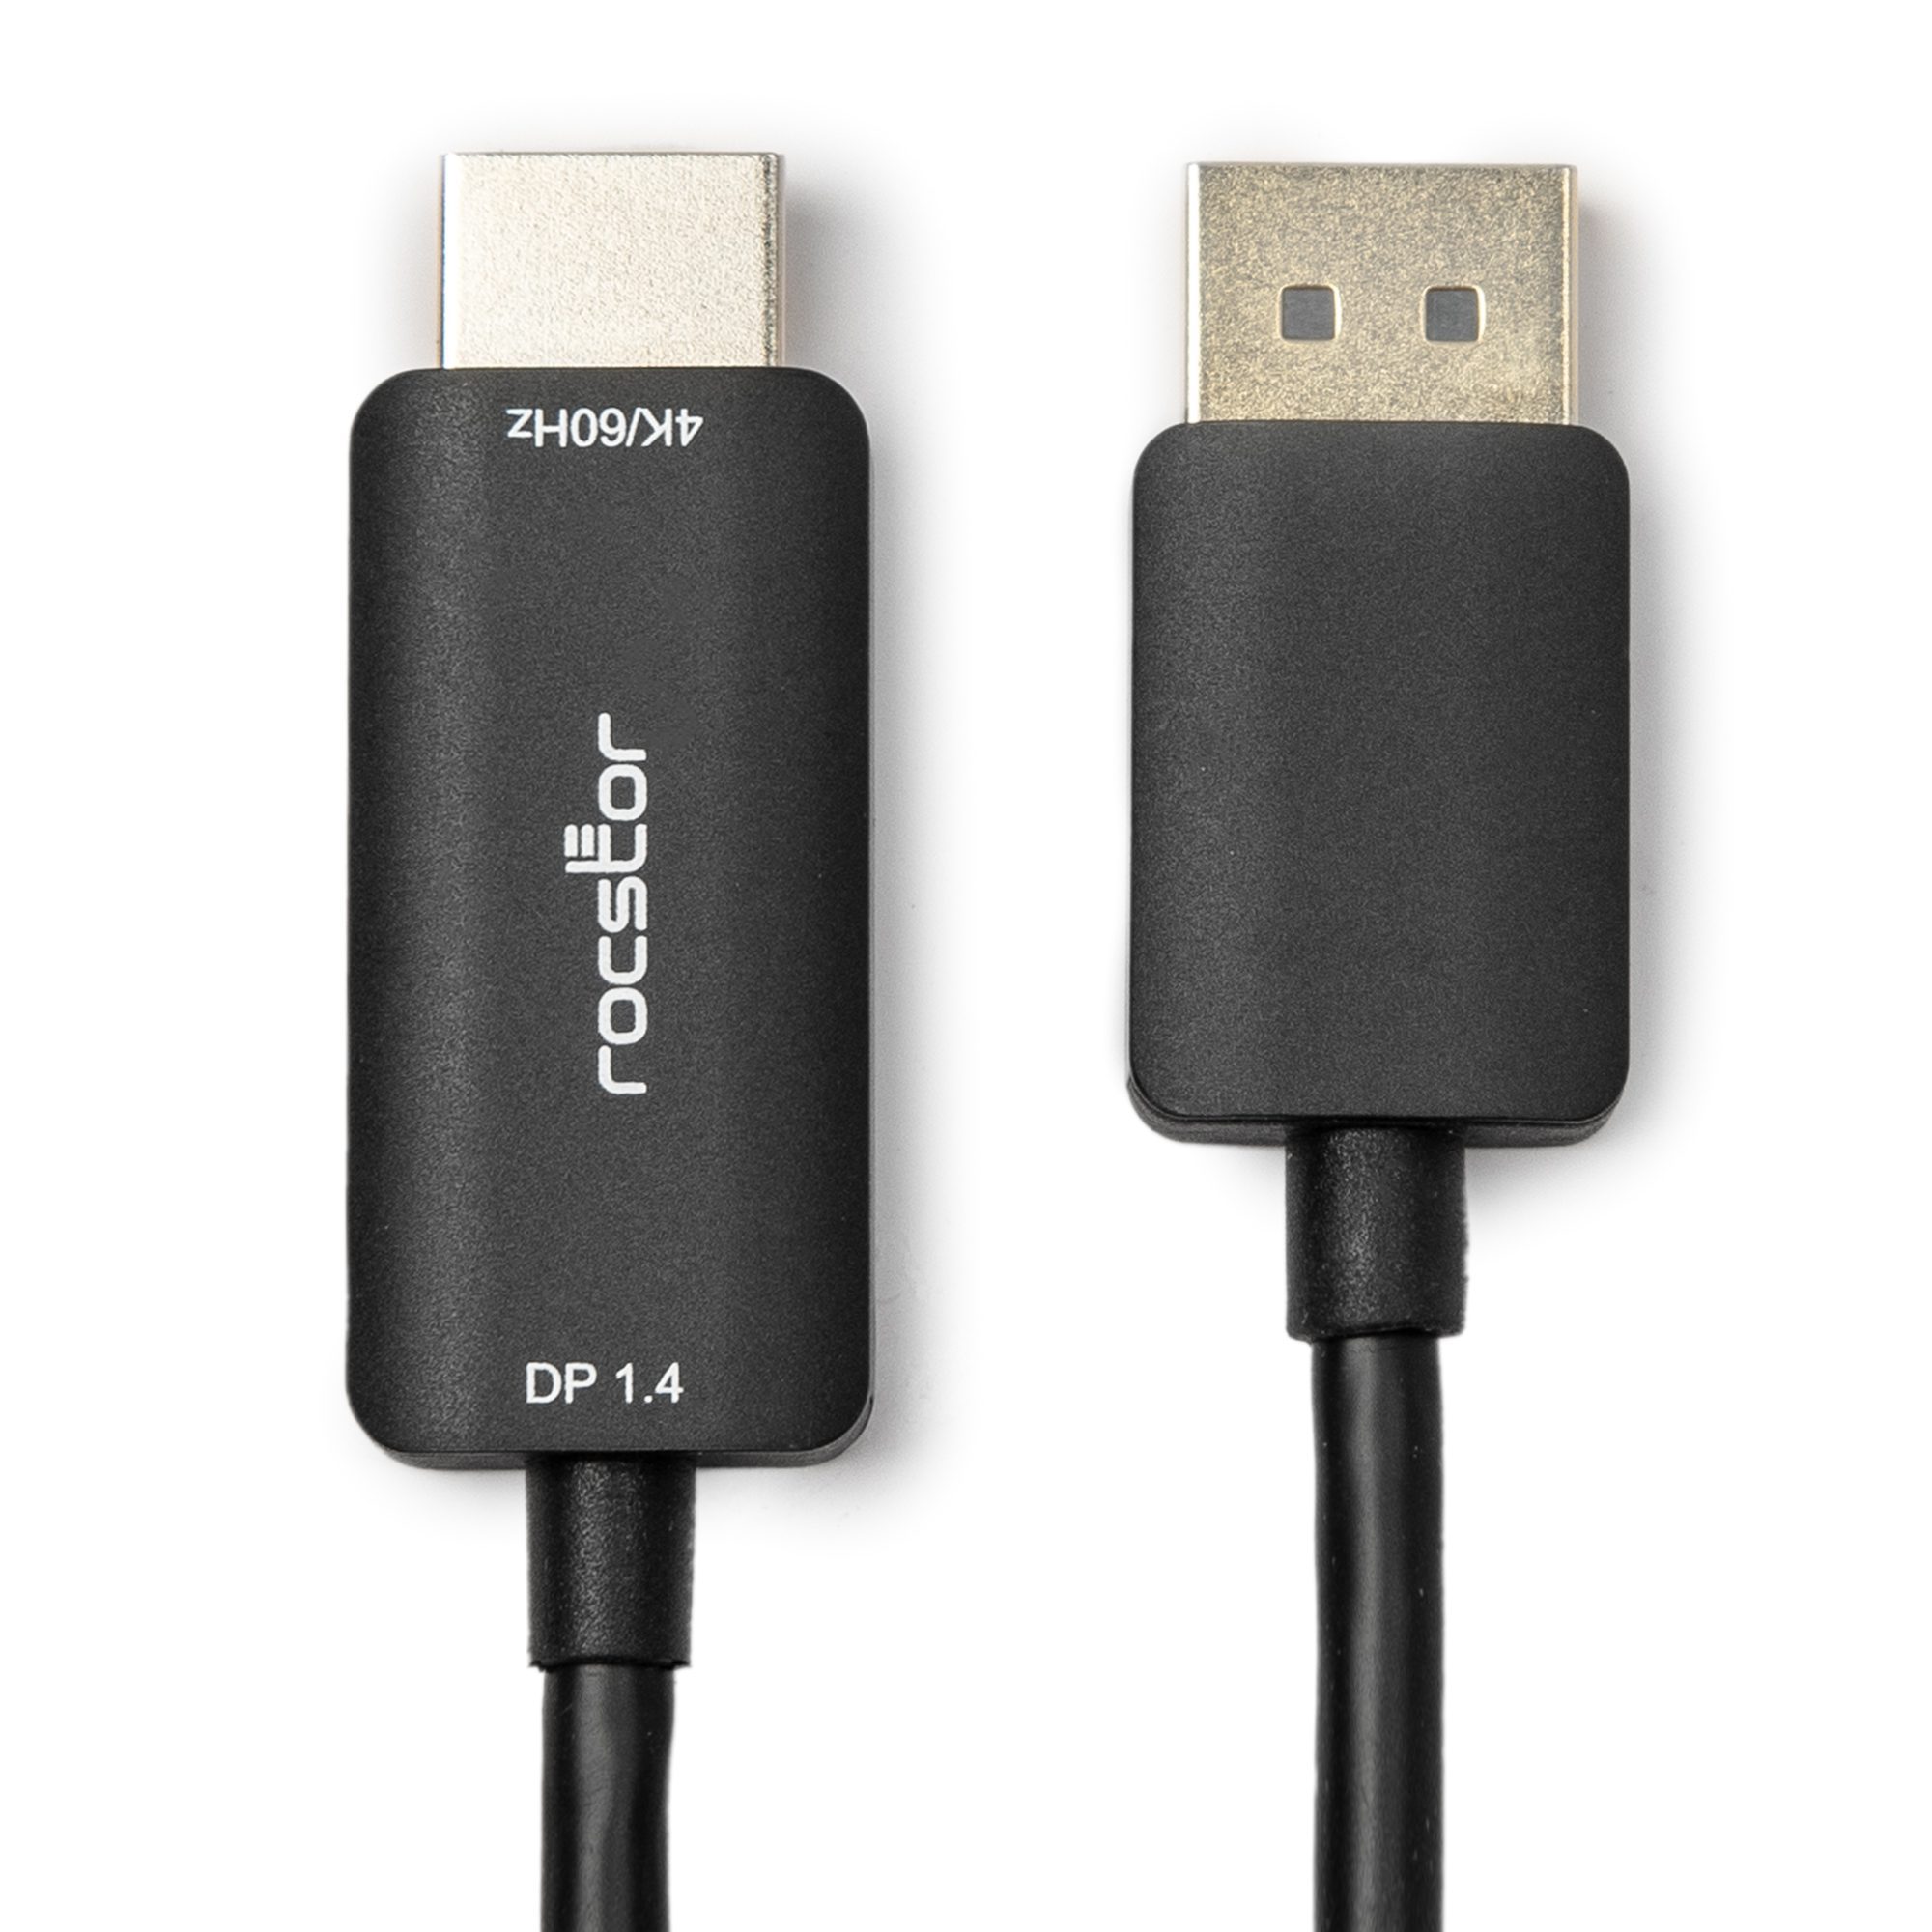 DisplayPort 1.4 to HDMI 2.0 Active Video Adapter Cable - 4K/60Hz